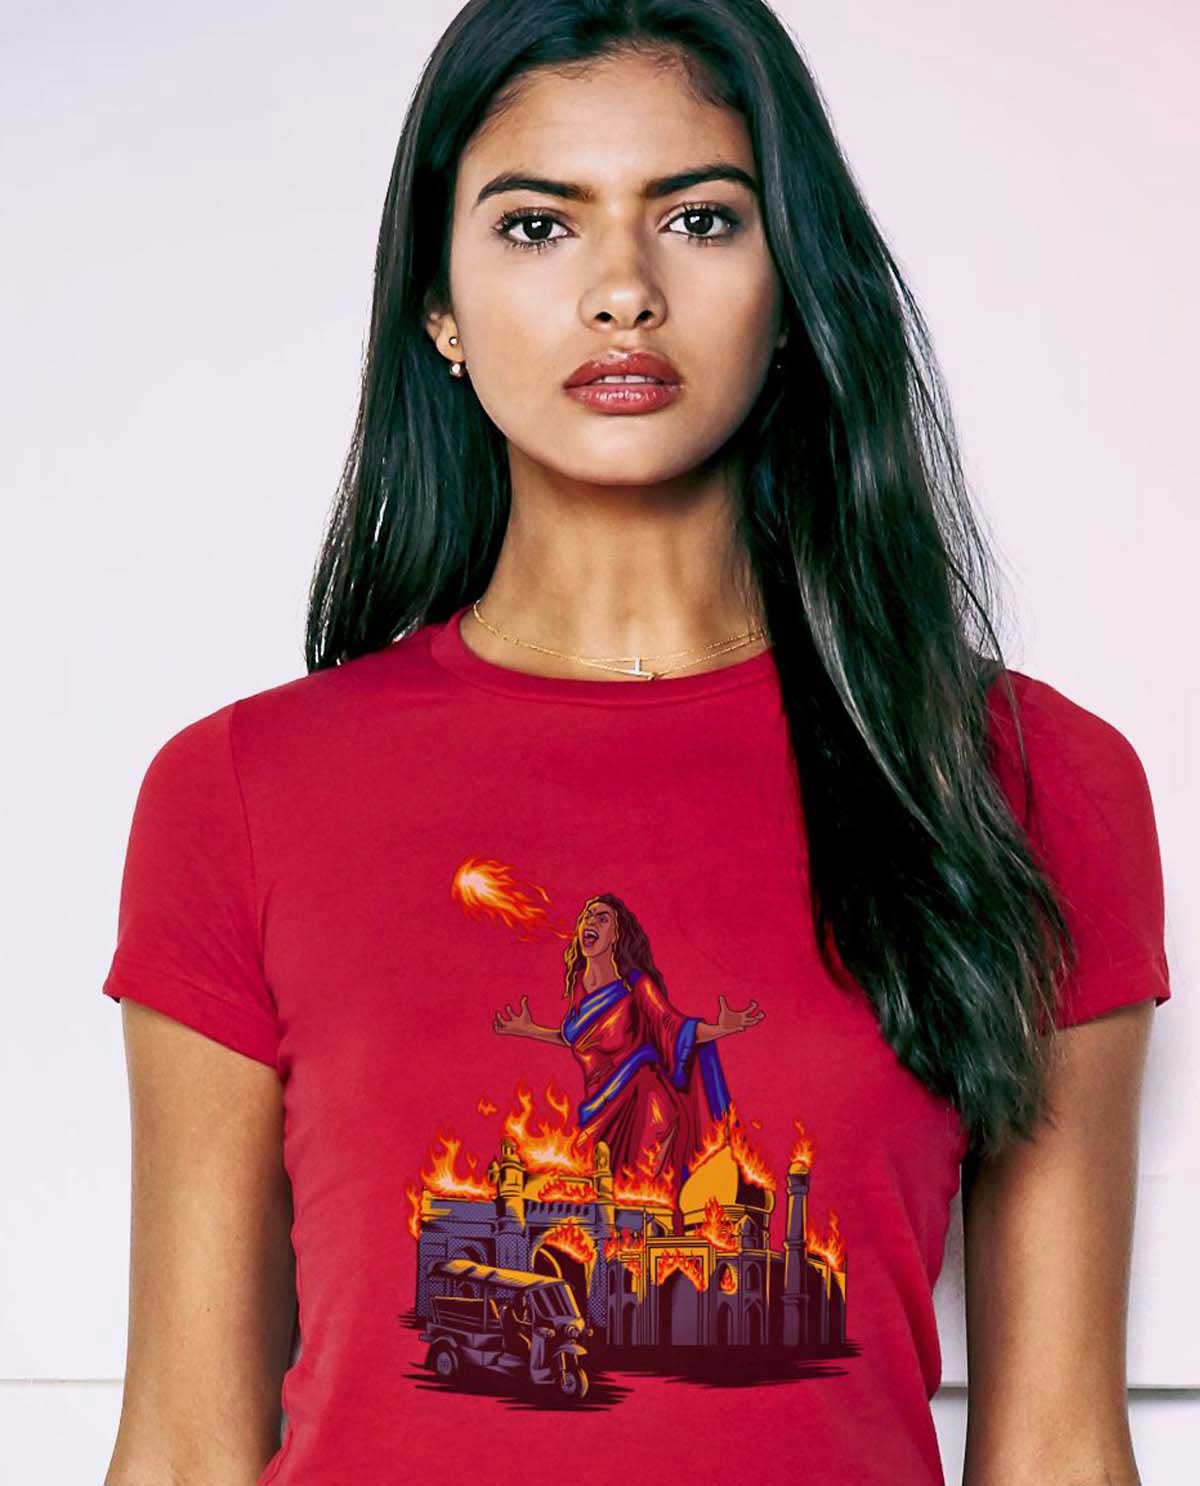 Brown Girl Rage Graphic Design Tshirt. South Asian female model wearing Red Fitted Graphic Design Tshirt.